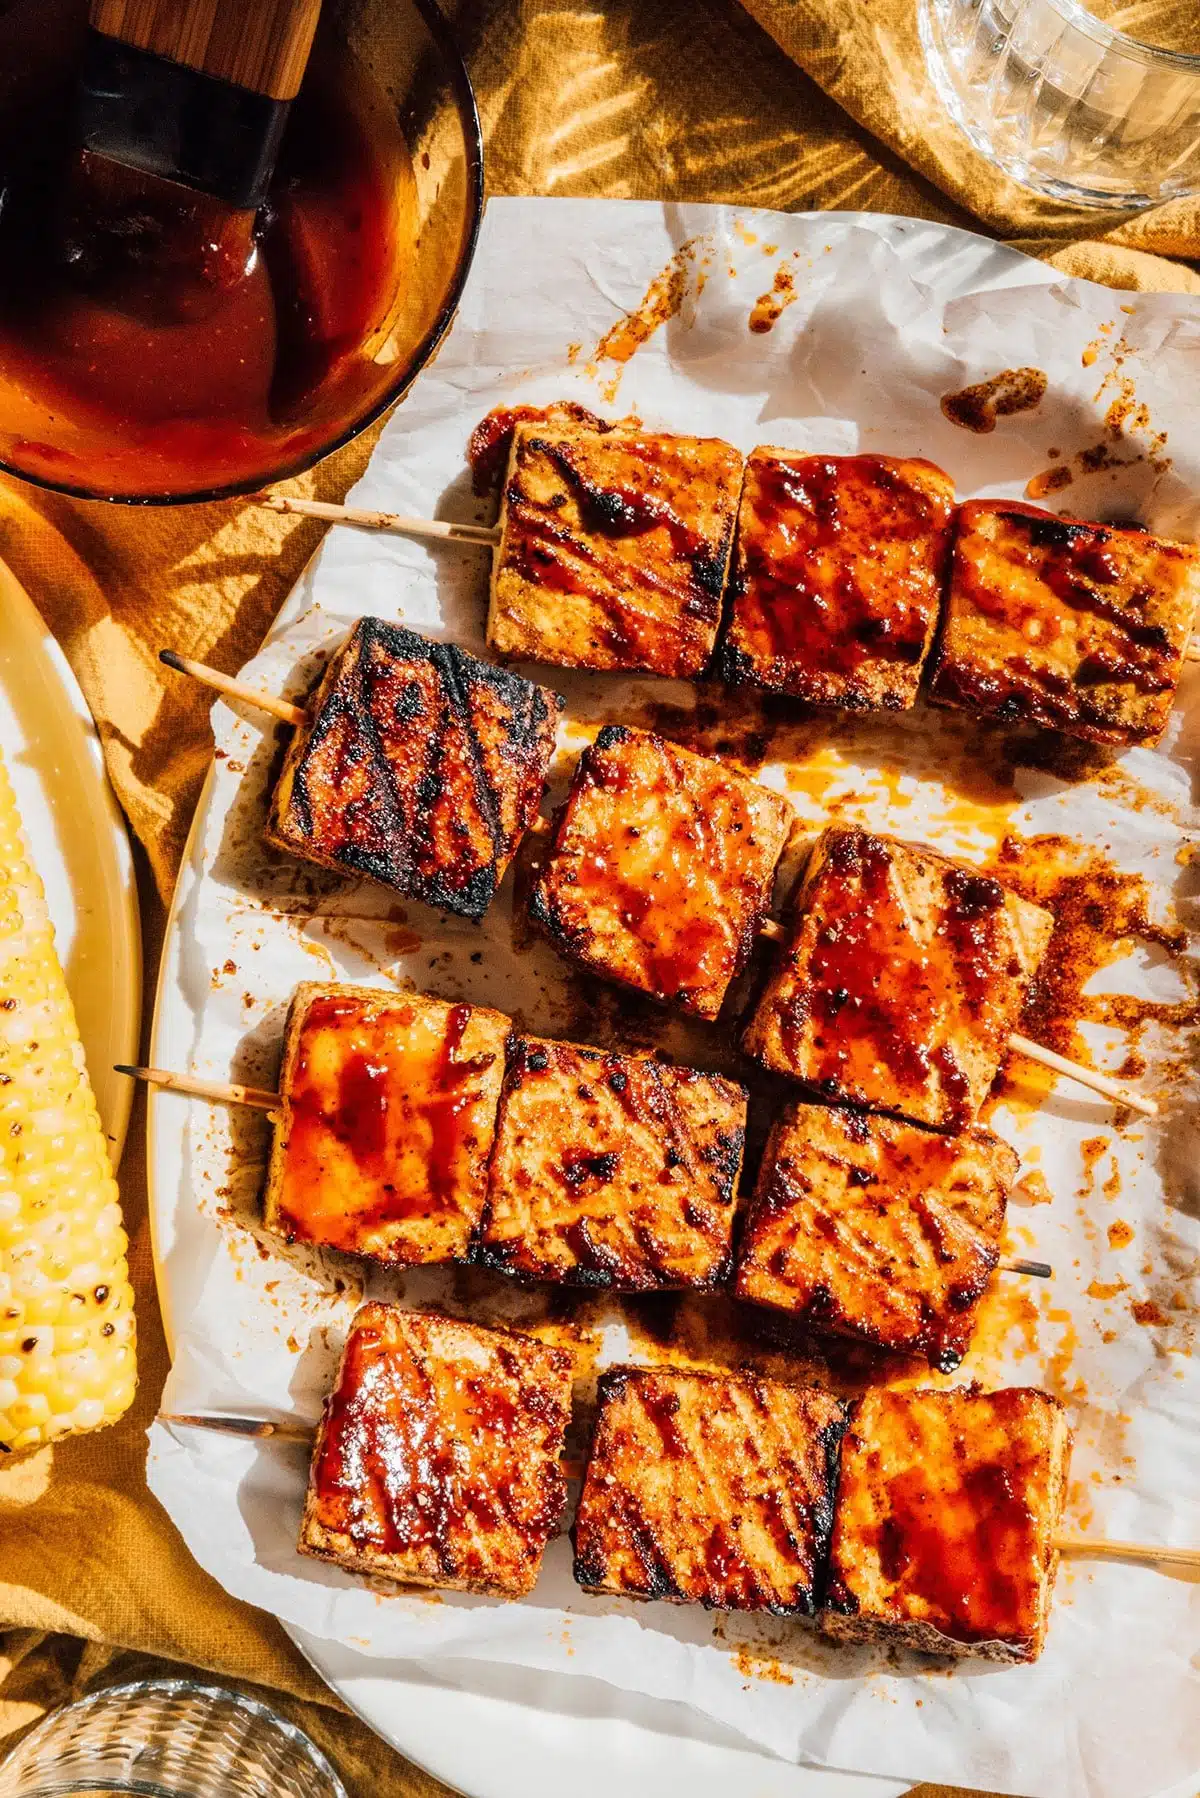 Grilled tofu skewers glazed with a savory sauce, accompanied by charred corn on the cob, all served on a rustic table basked in warm sunlight.